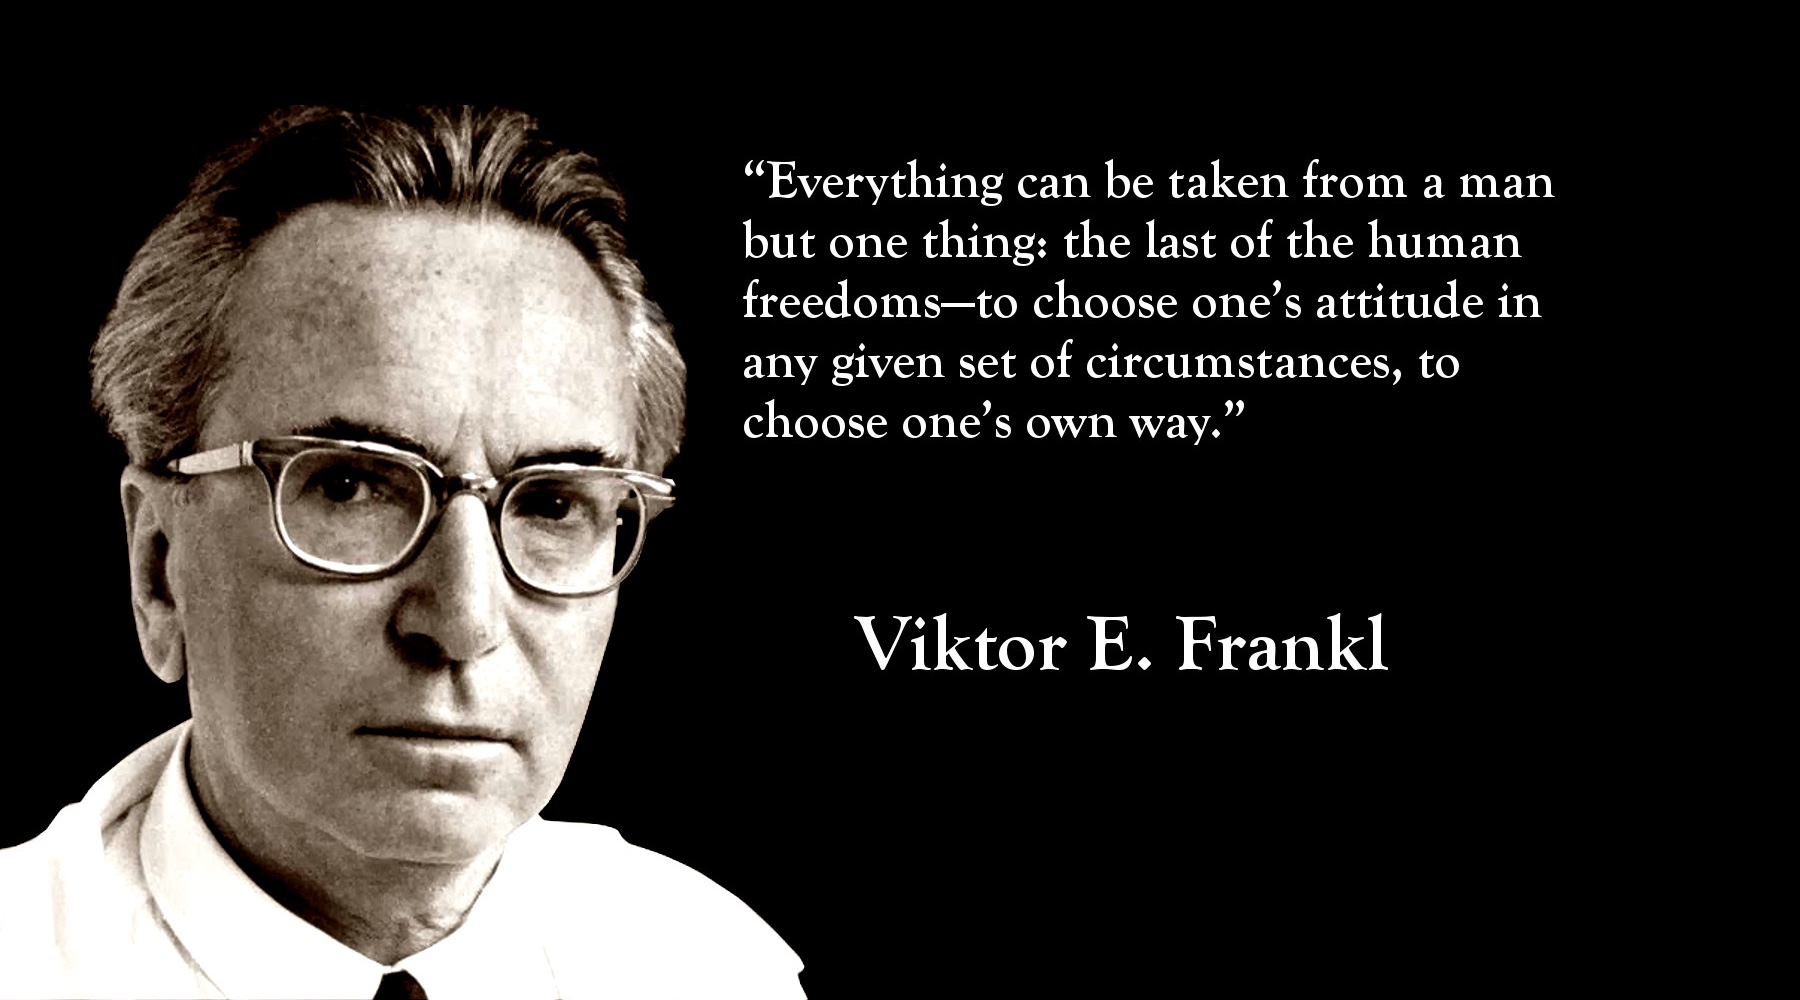 Man’s Search of Meaning by Victor Frankl